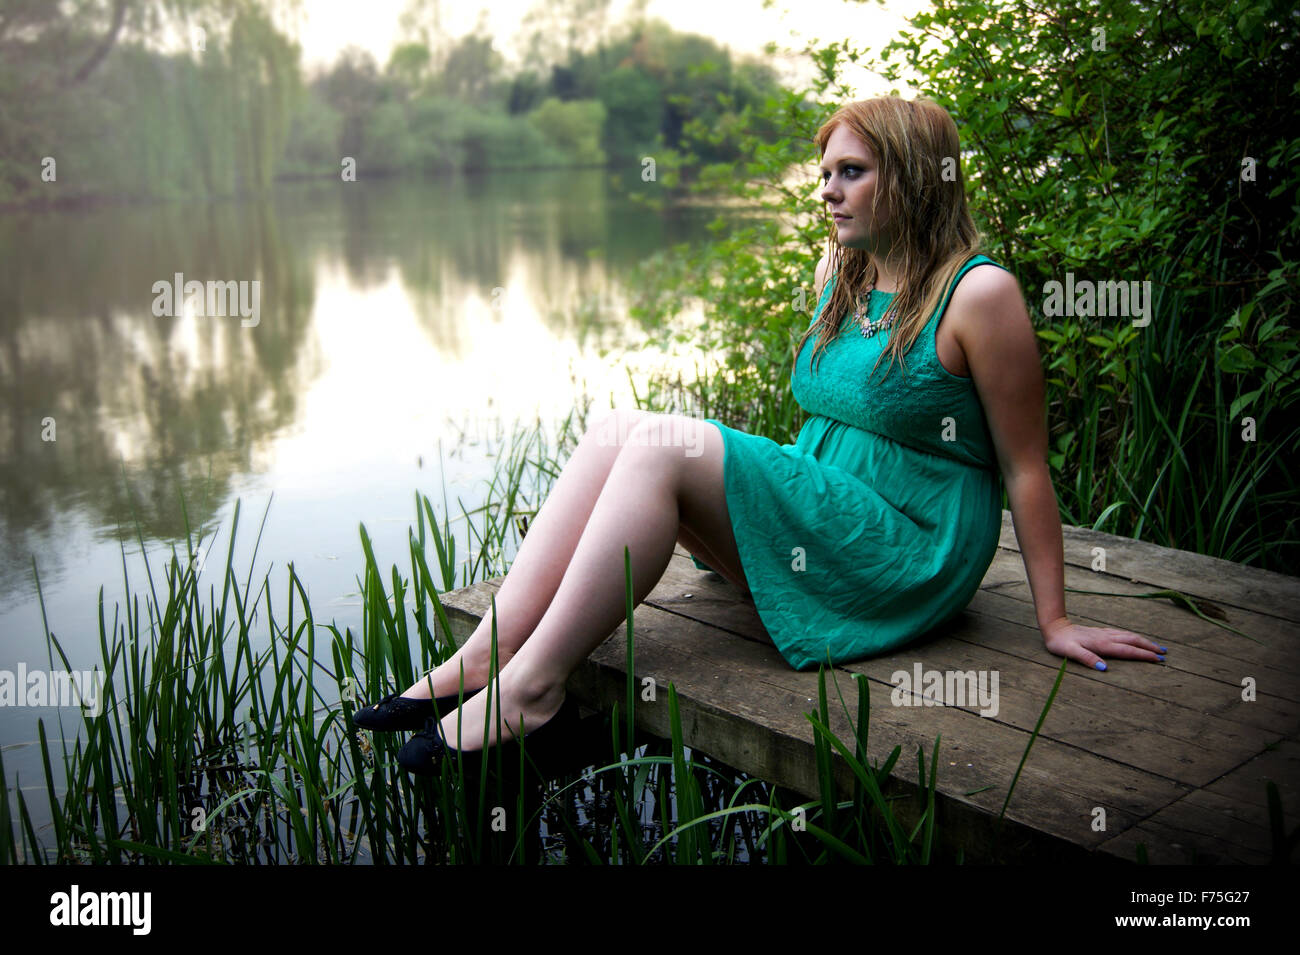 woman with wet hair sat next to lake Stock Photo